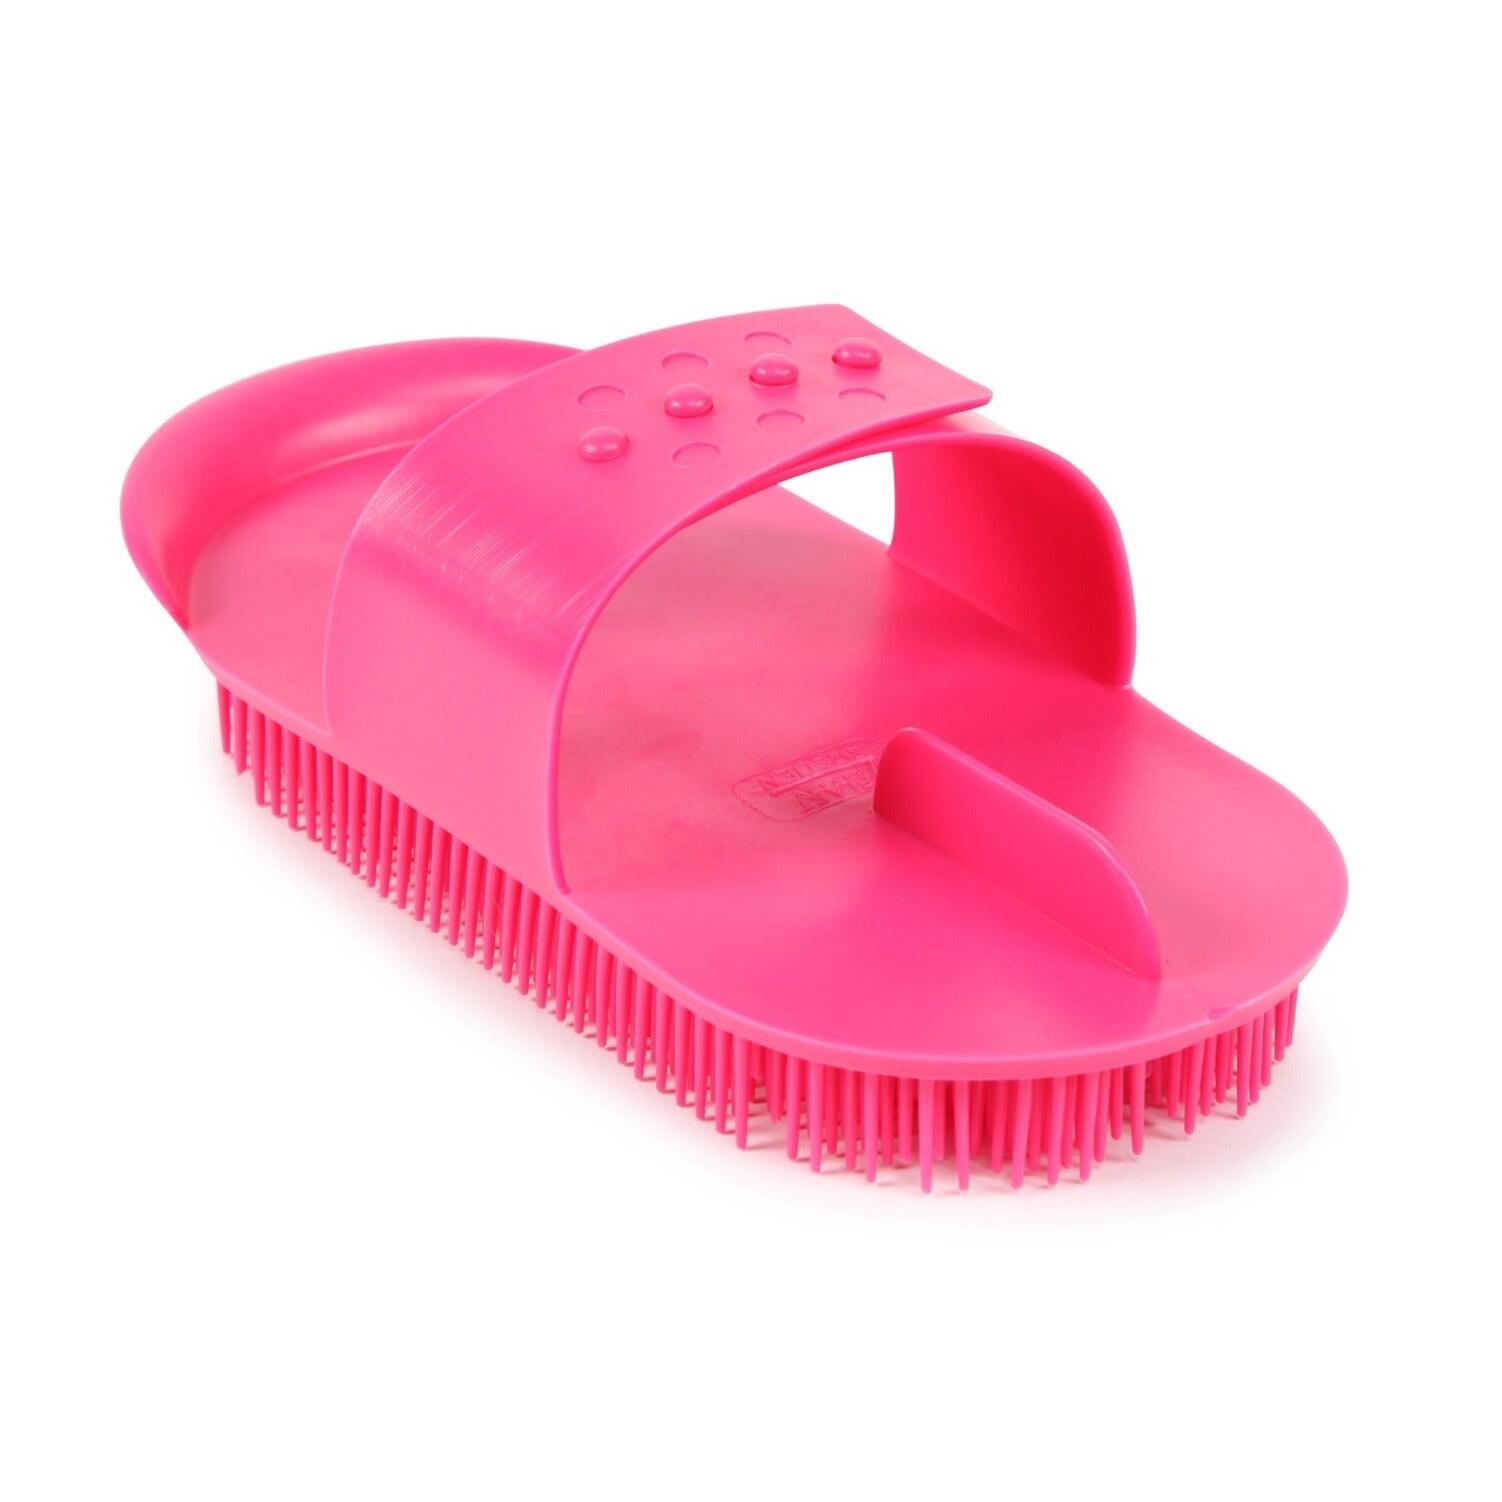 Plastic Horse Curry Comb (Baby Pink) 4/4